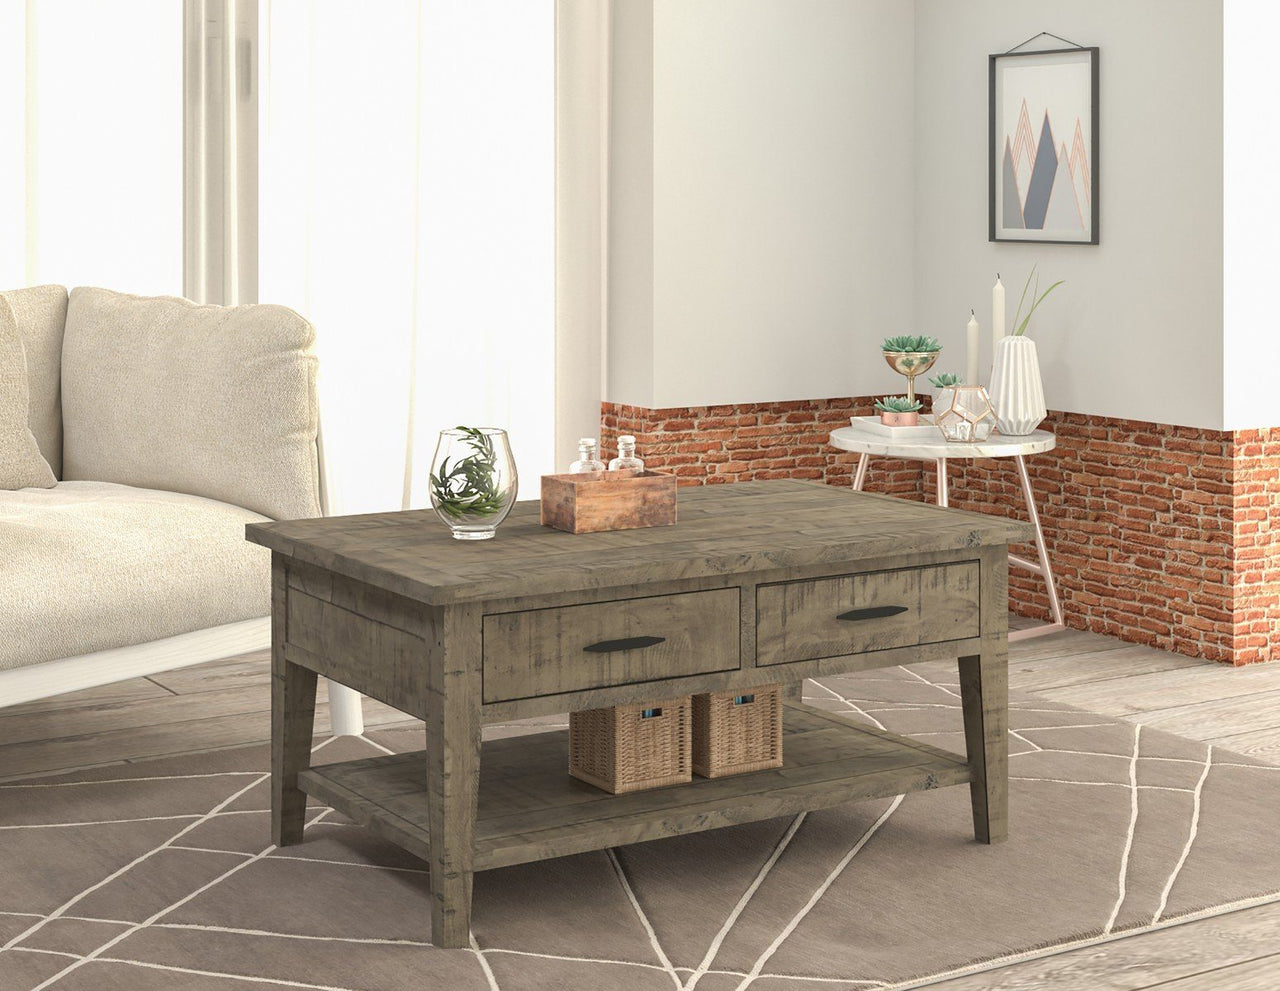 Ashford 40" Reclaimed Wood Coffee Table with Storage Shelf and Two Drawers Coffee Table AndMakers 